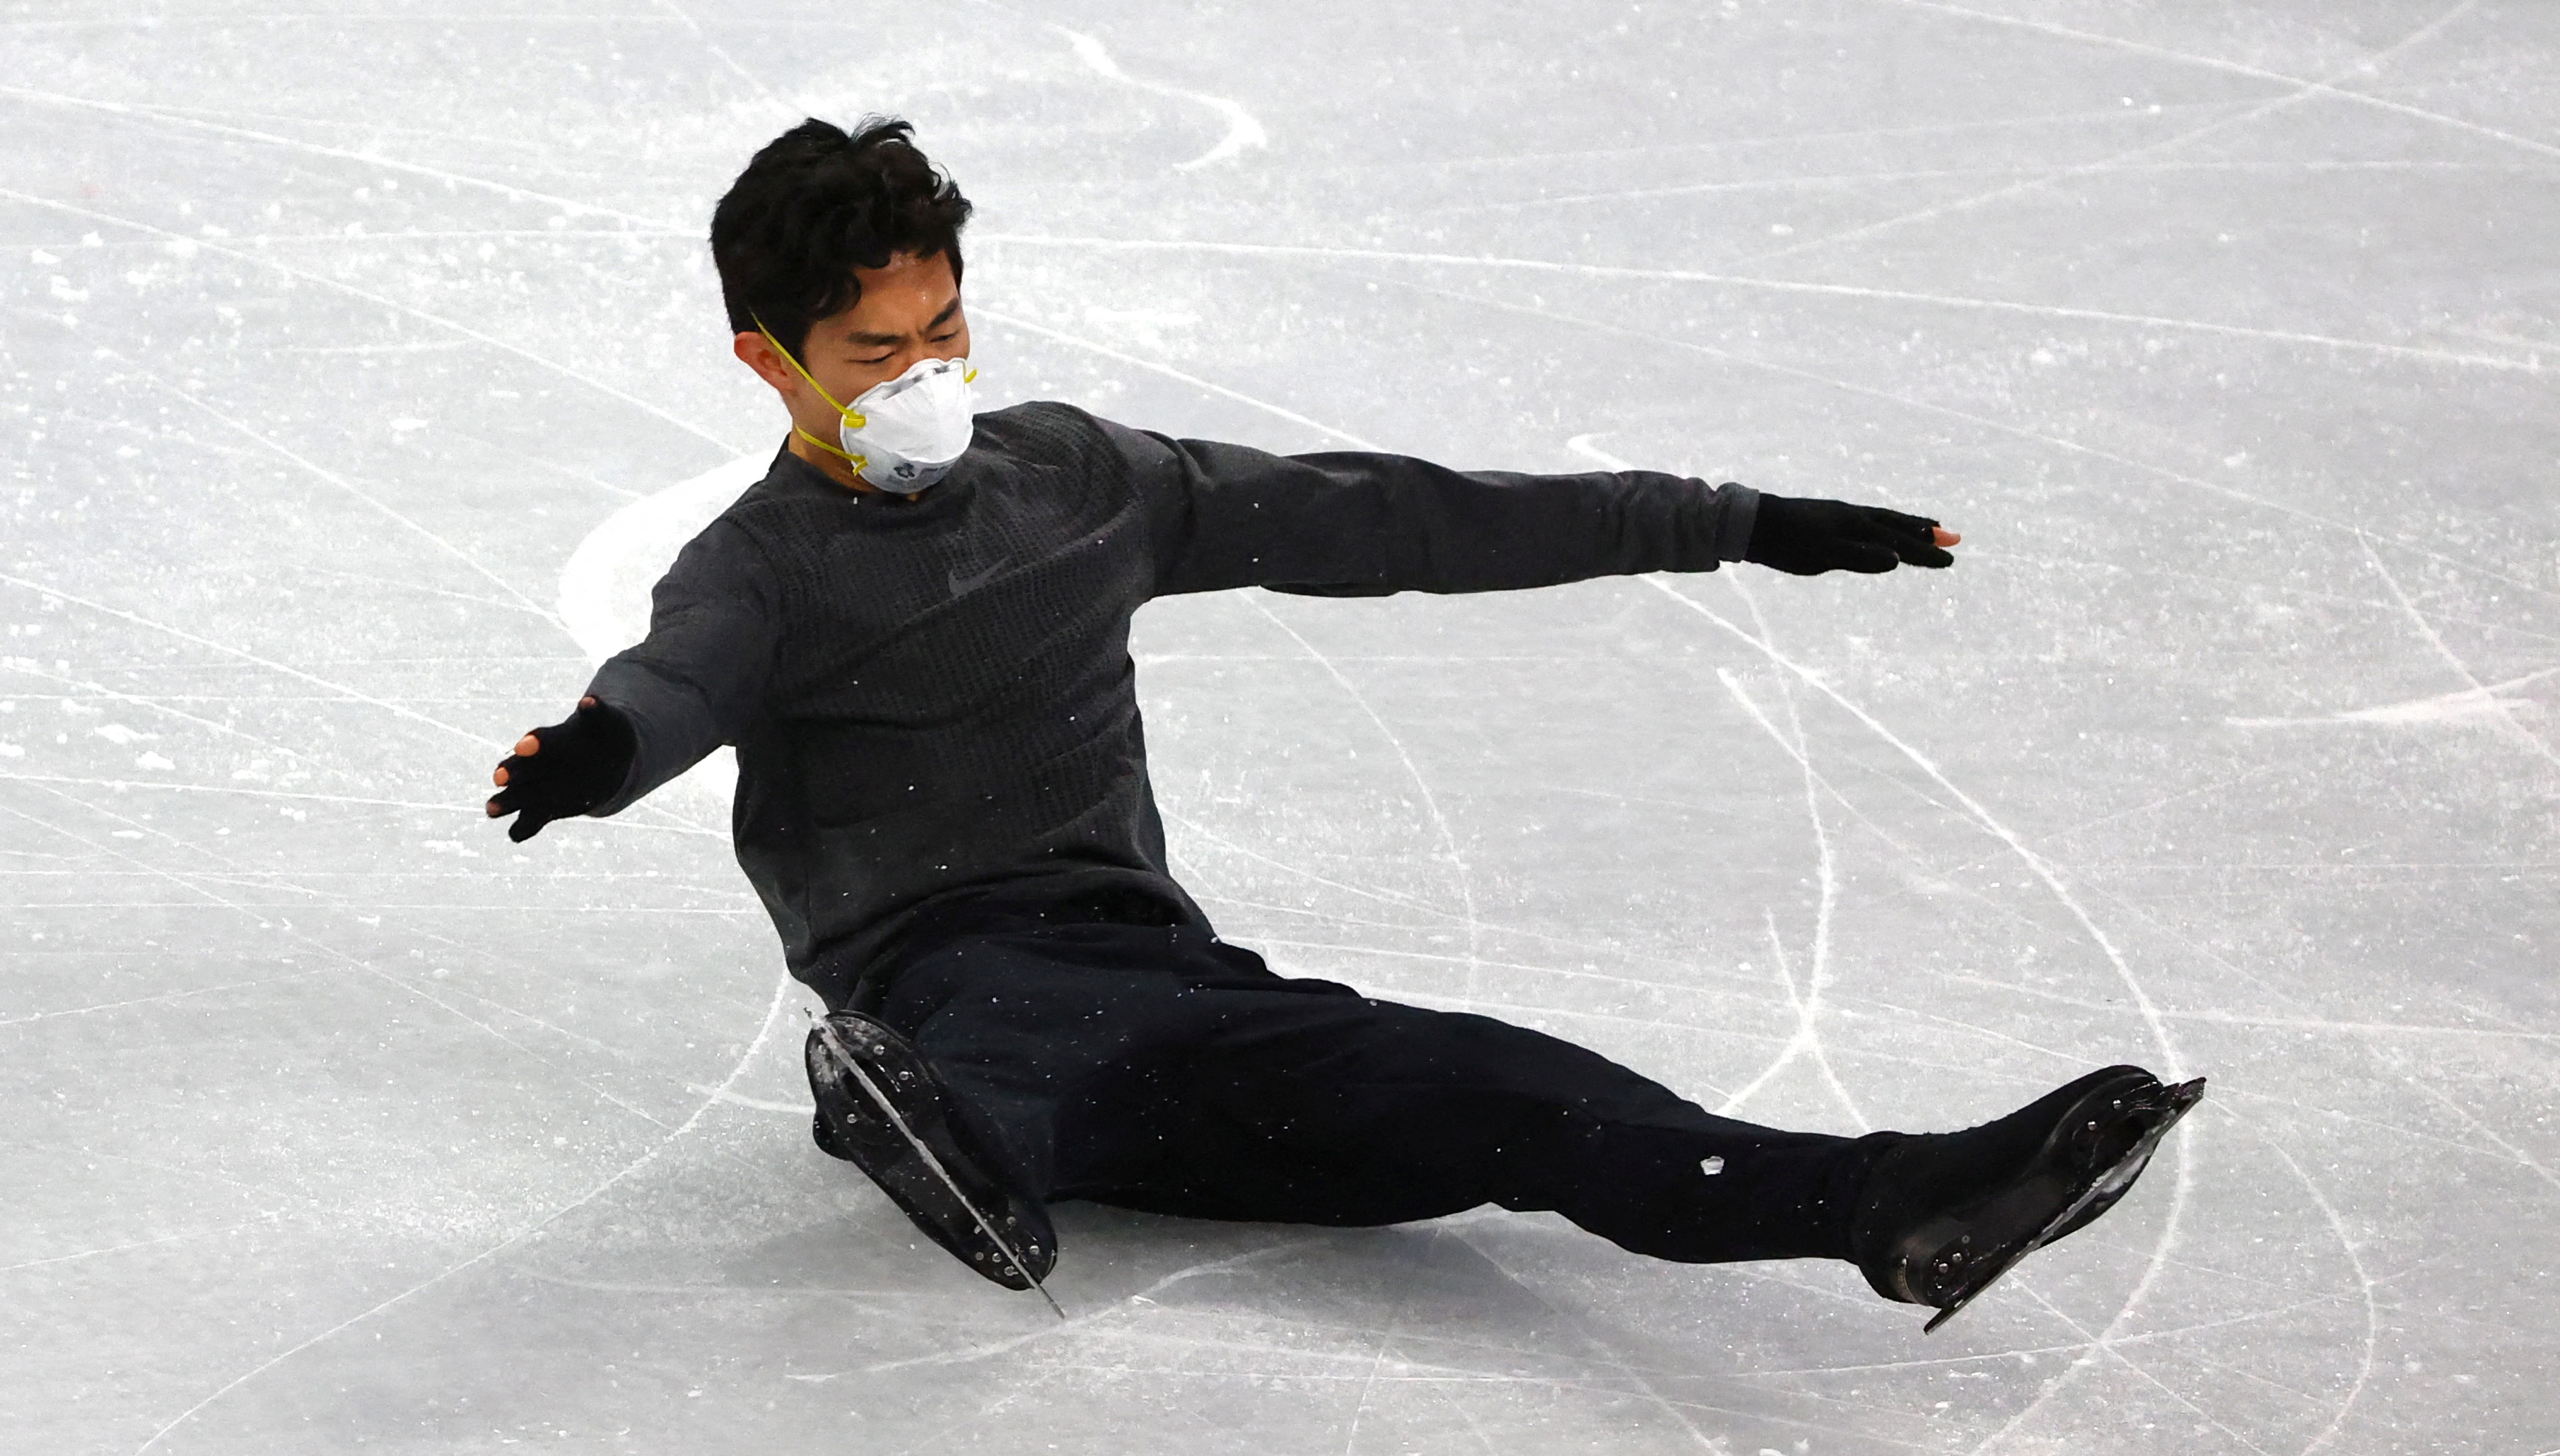 After upset in debut, Nathan Chen out to enjoy second Games